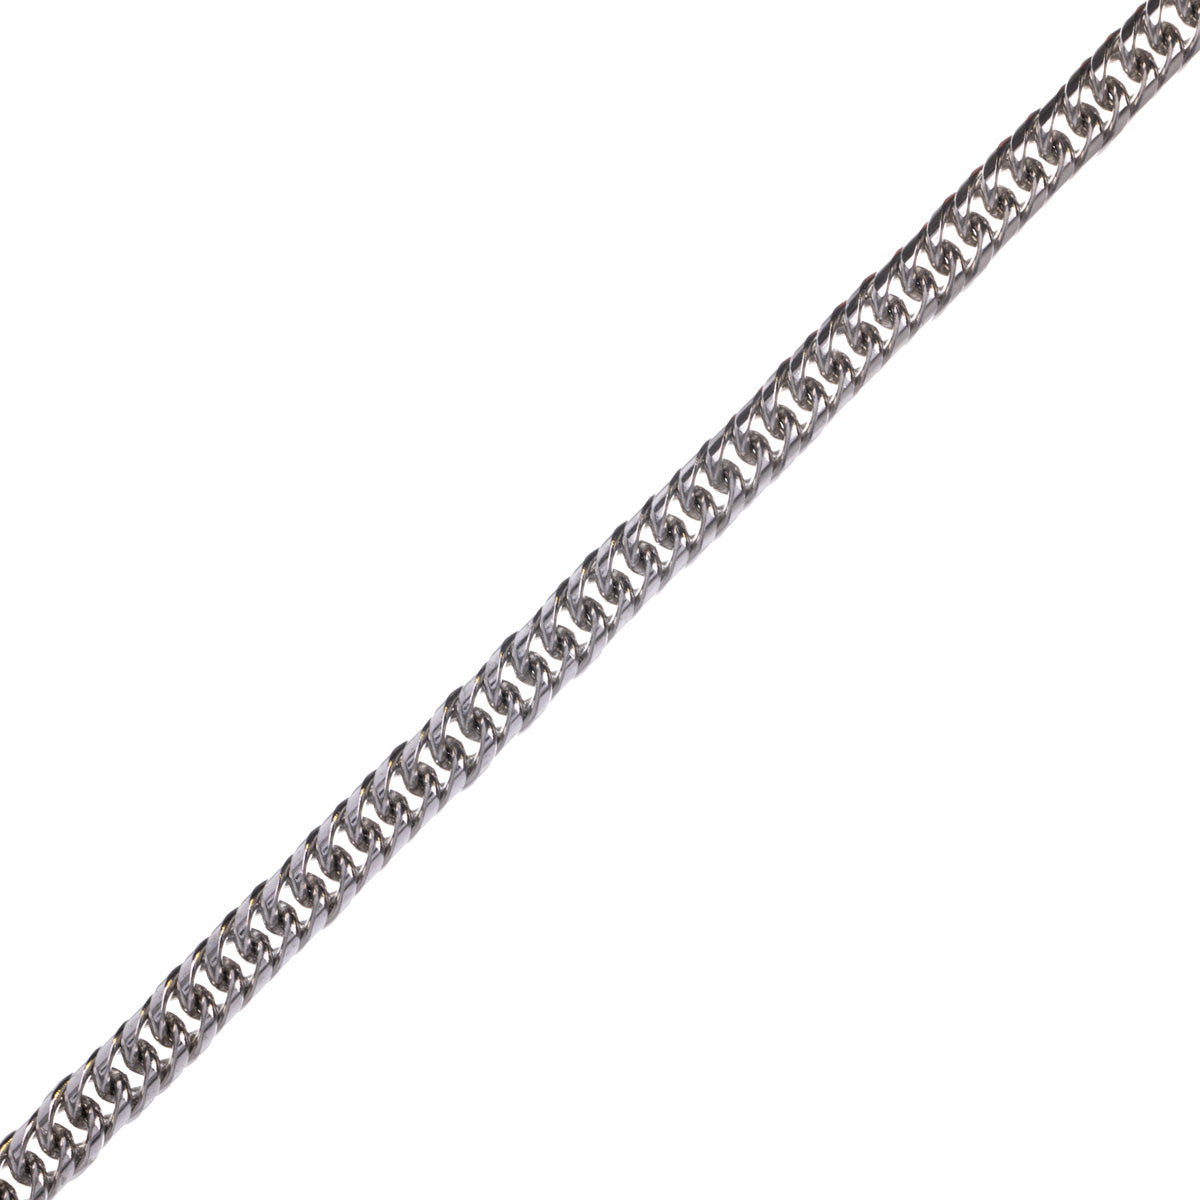 Double link armoured chain steel chain 55cm 6mm (Steel 316L)